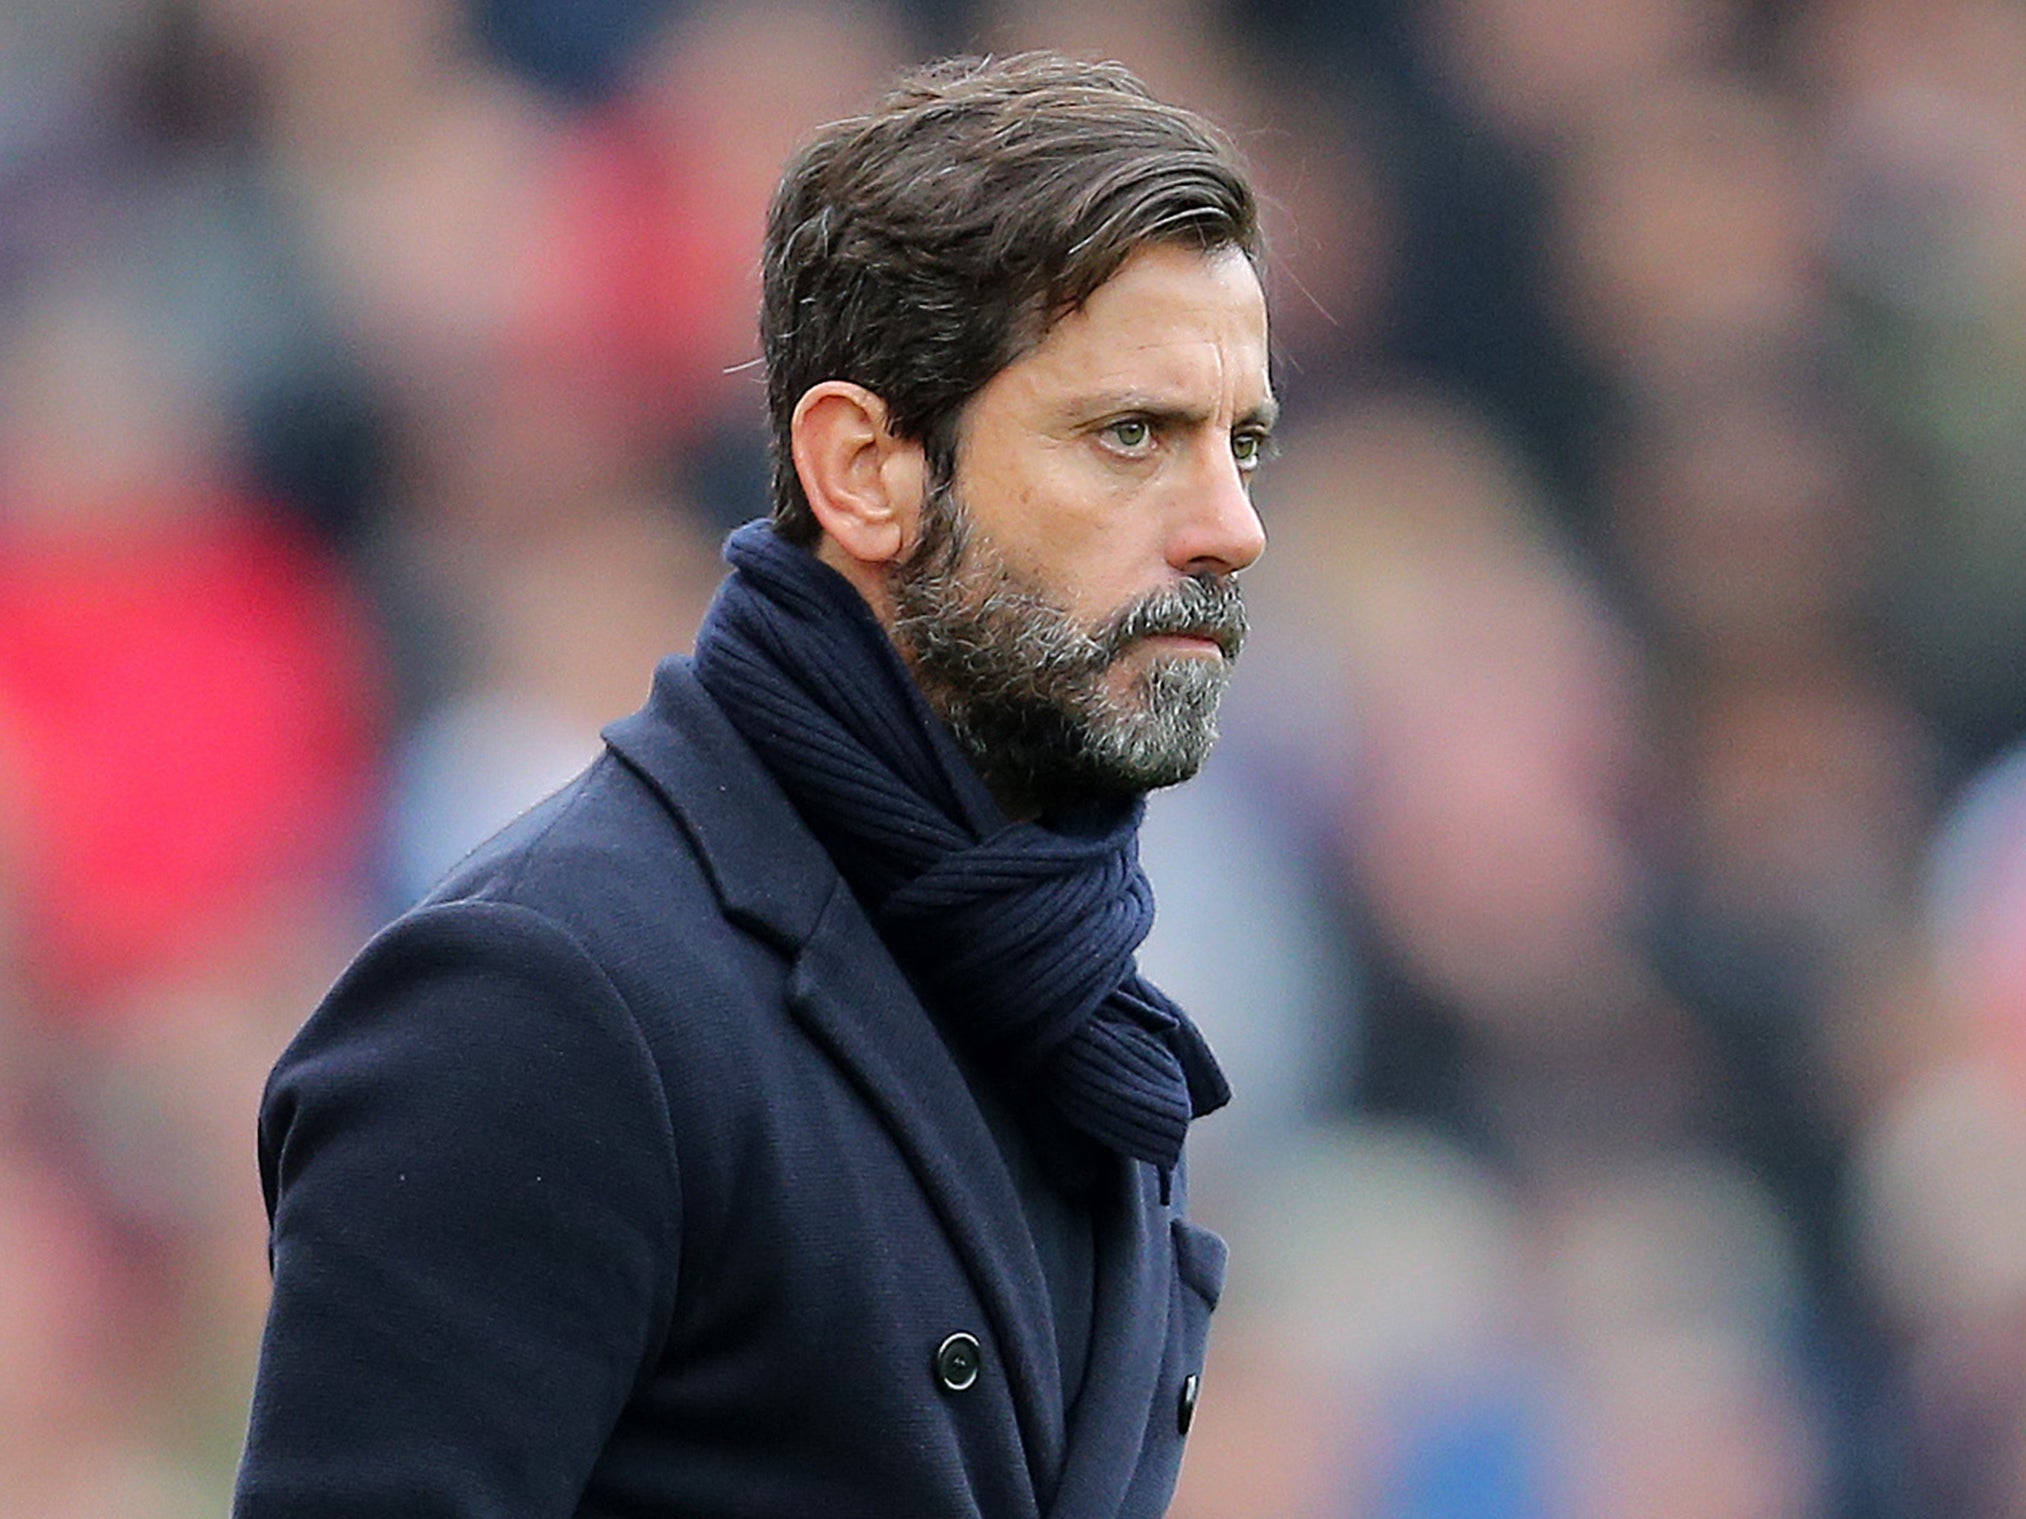 Watford reappoint Quique Sanchez Flores as manager to replace sacked Javi Gracia